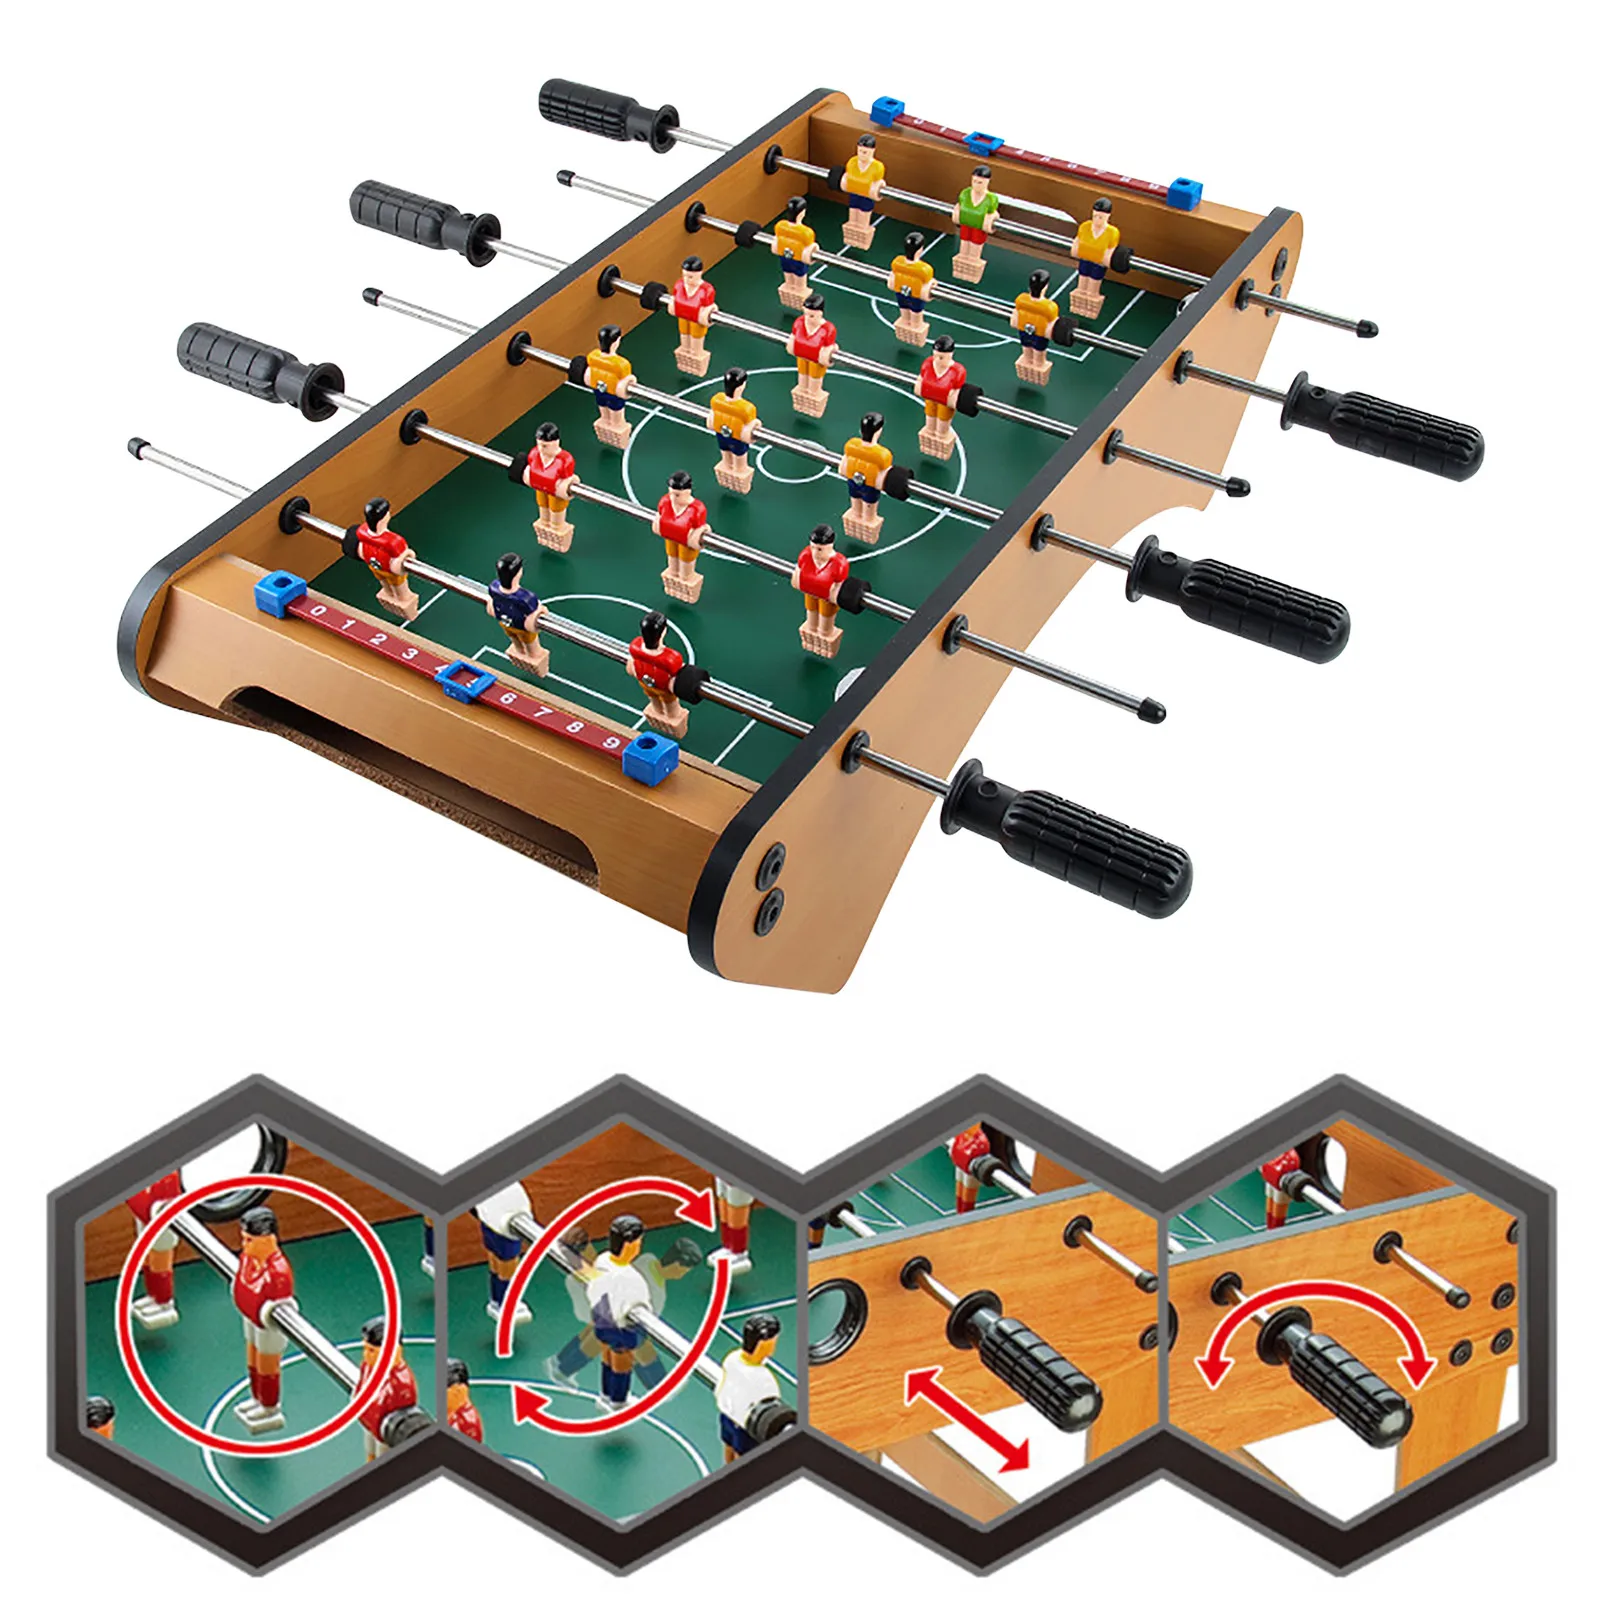 

Foosball Table Mini Football Table Game 2 Footballs Classic Recreational Hand Soccer Game For Kids Family Night Parties Game